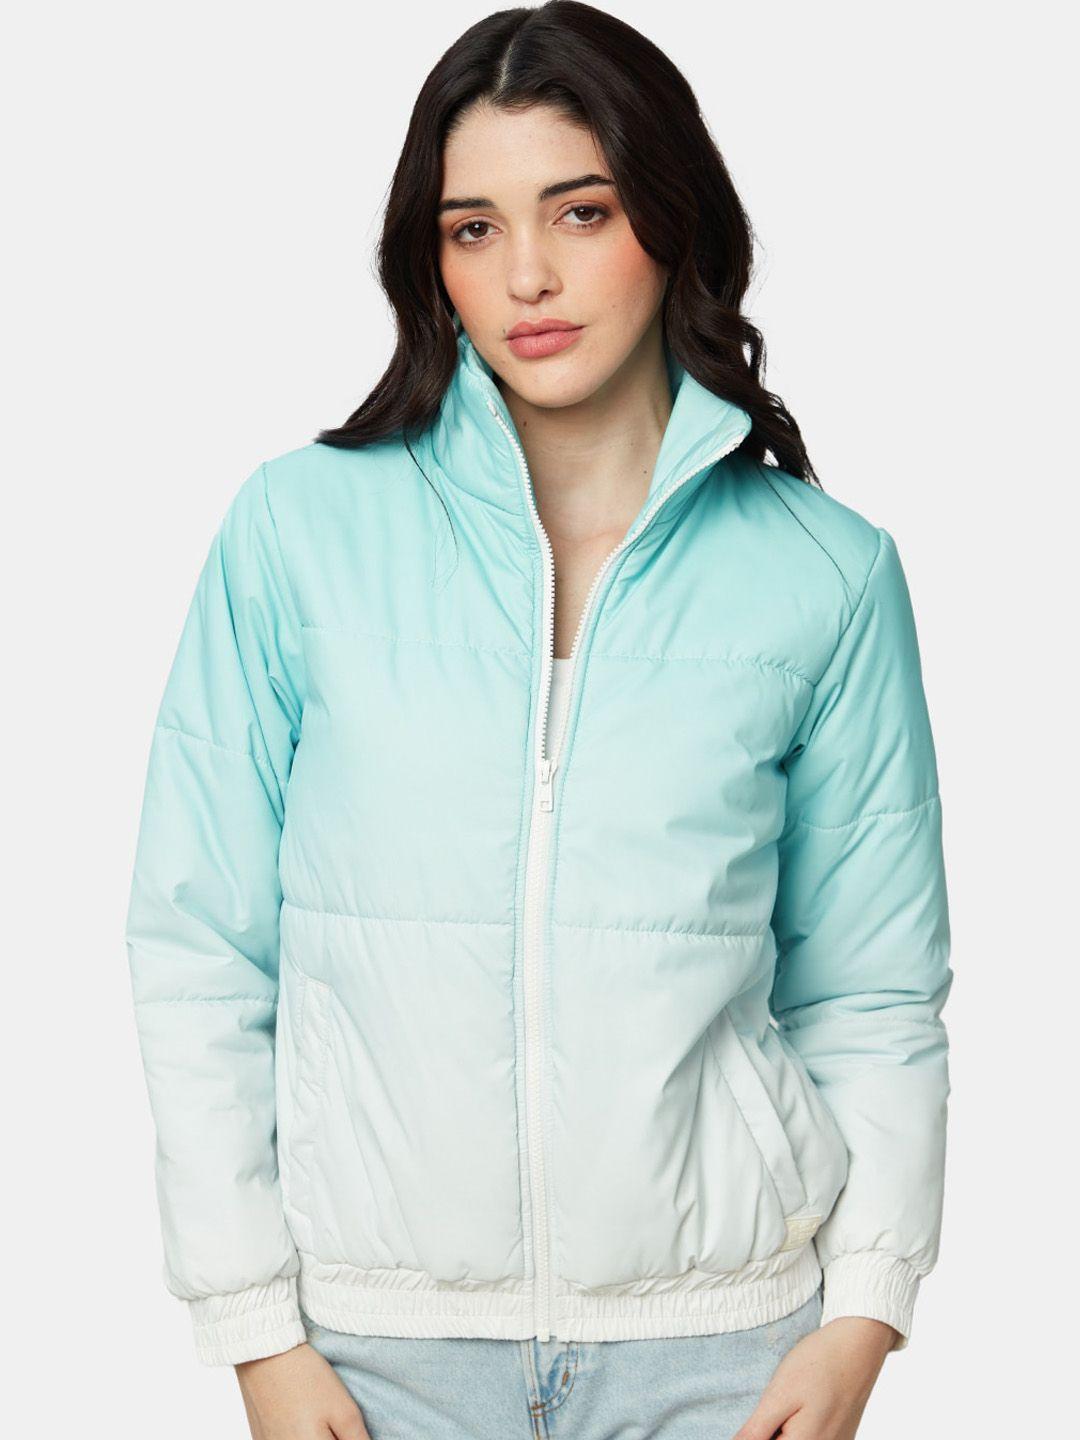 the-souled-store-women-ombre-crop-puffer-jacket